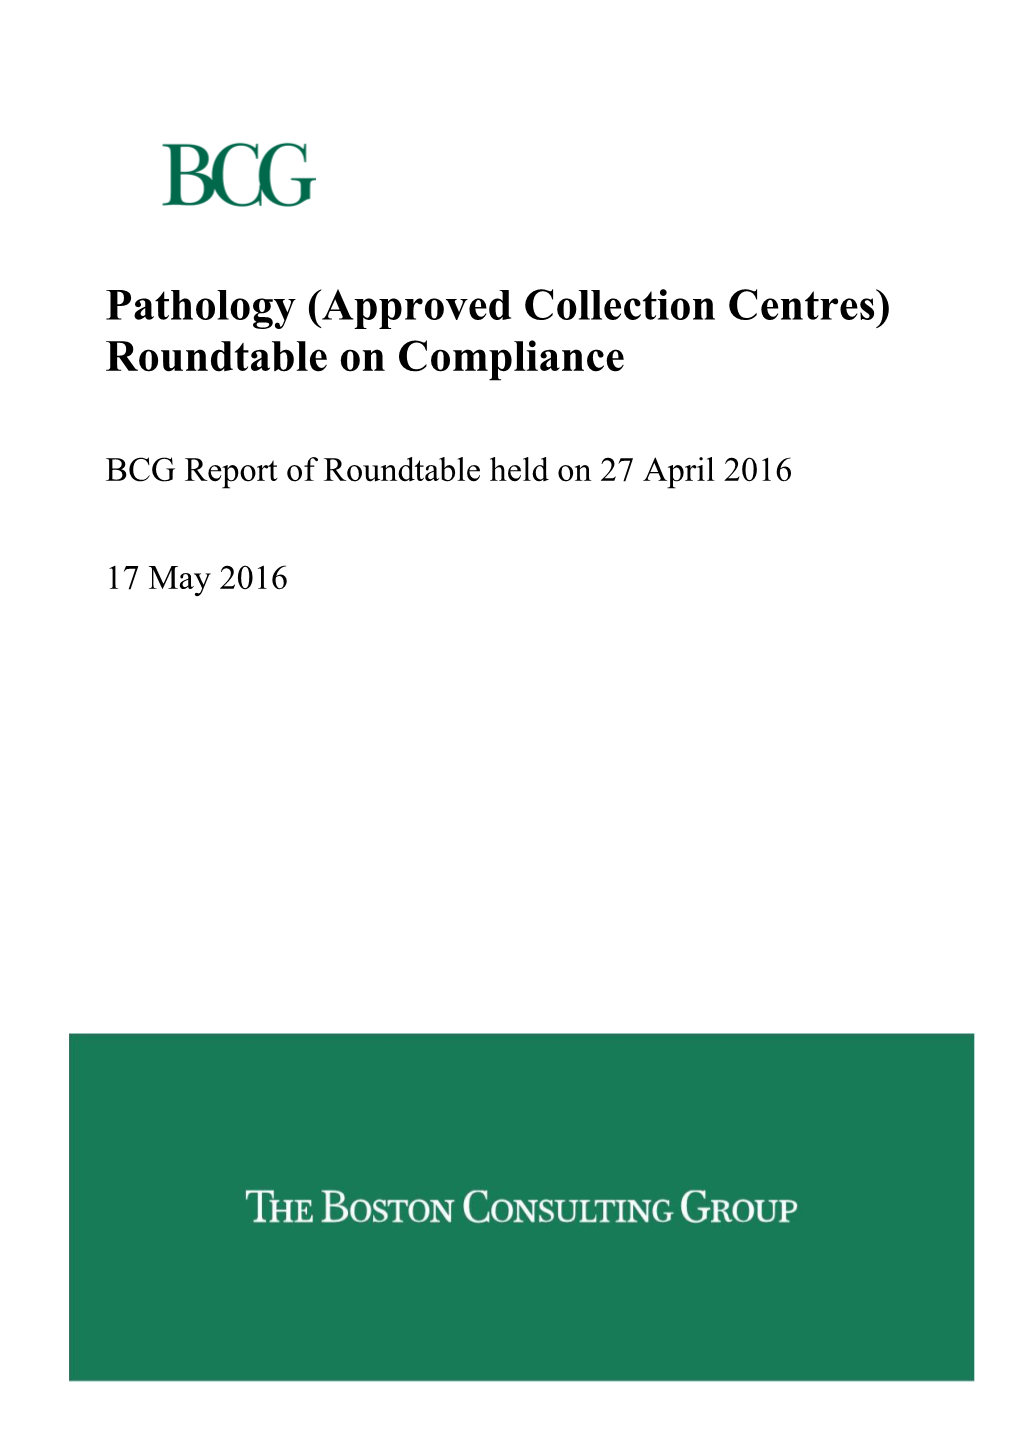 Pathology (Approved Collection Centres) Roundtable on Compliance